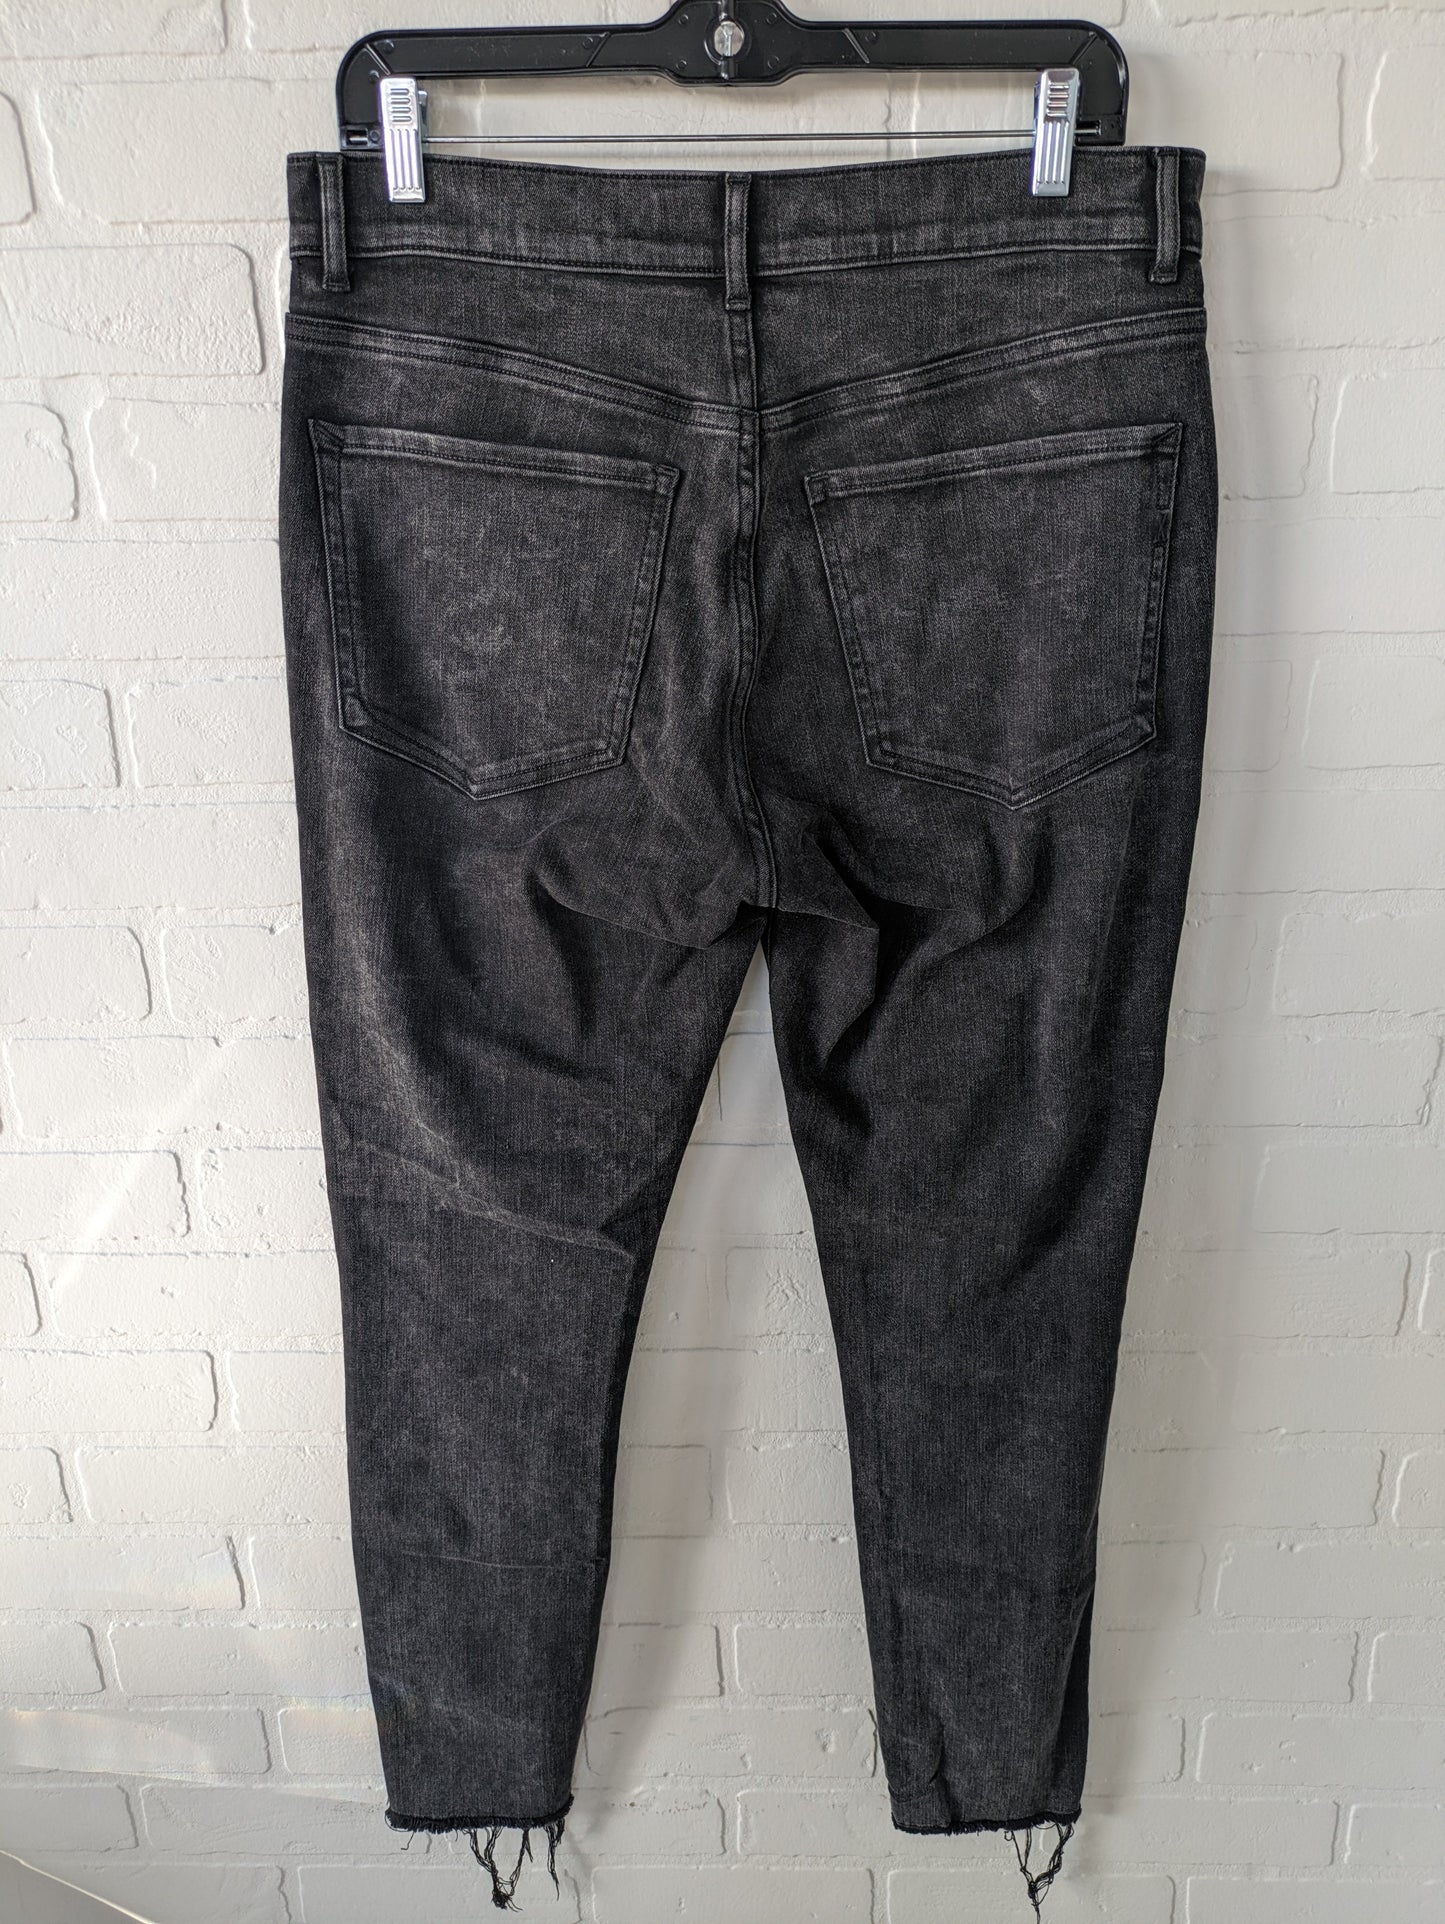 Jeggings By Express  Size: 12